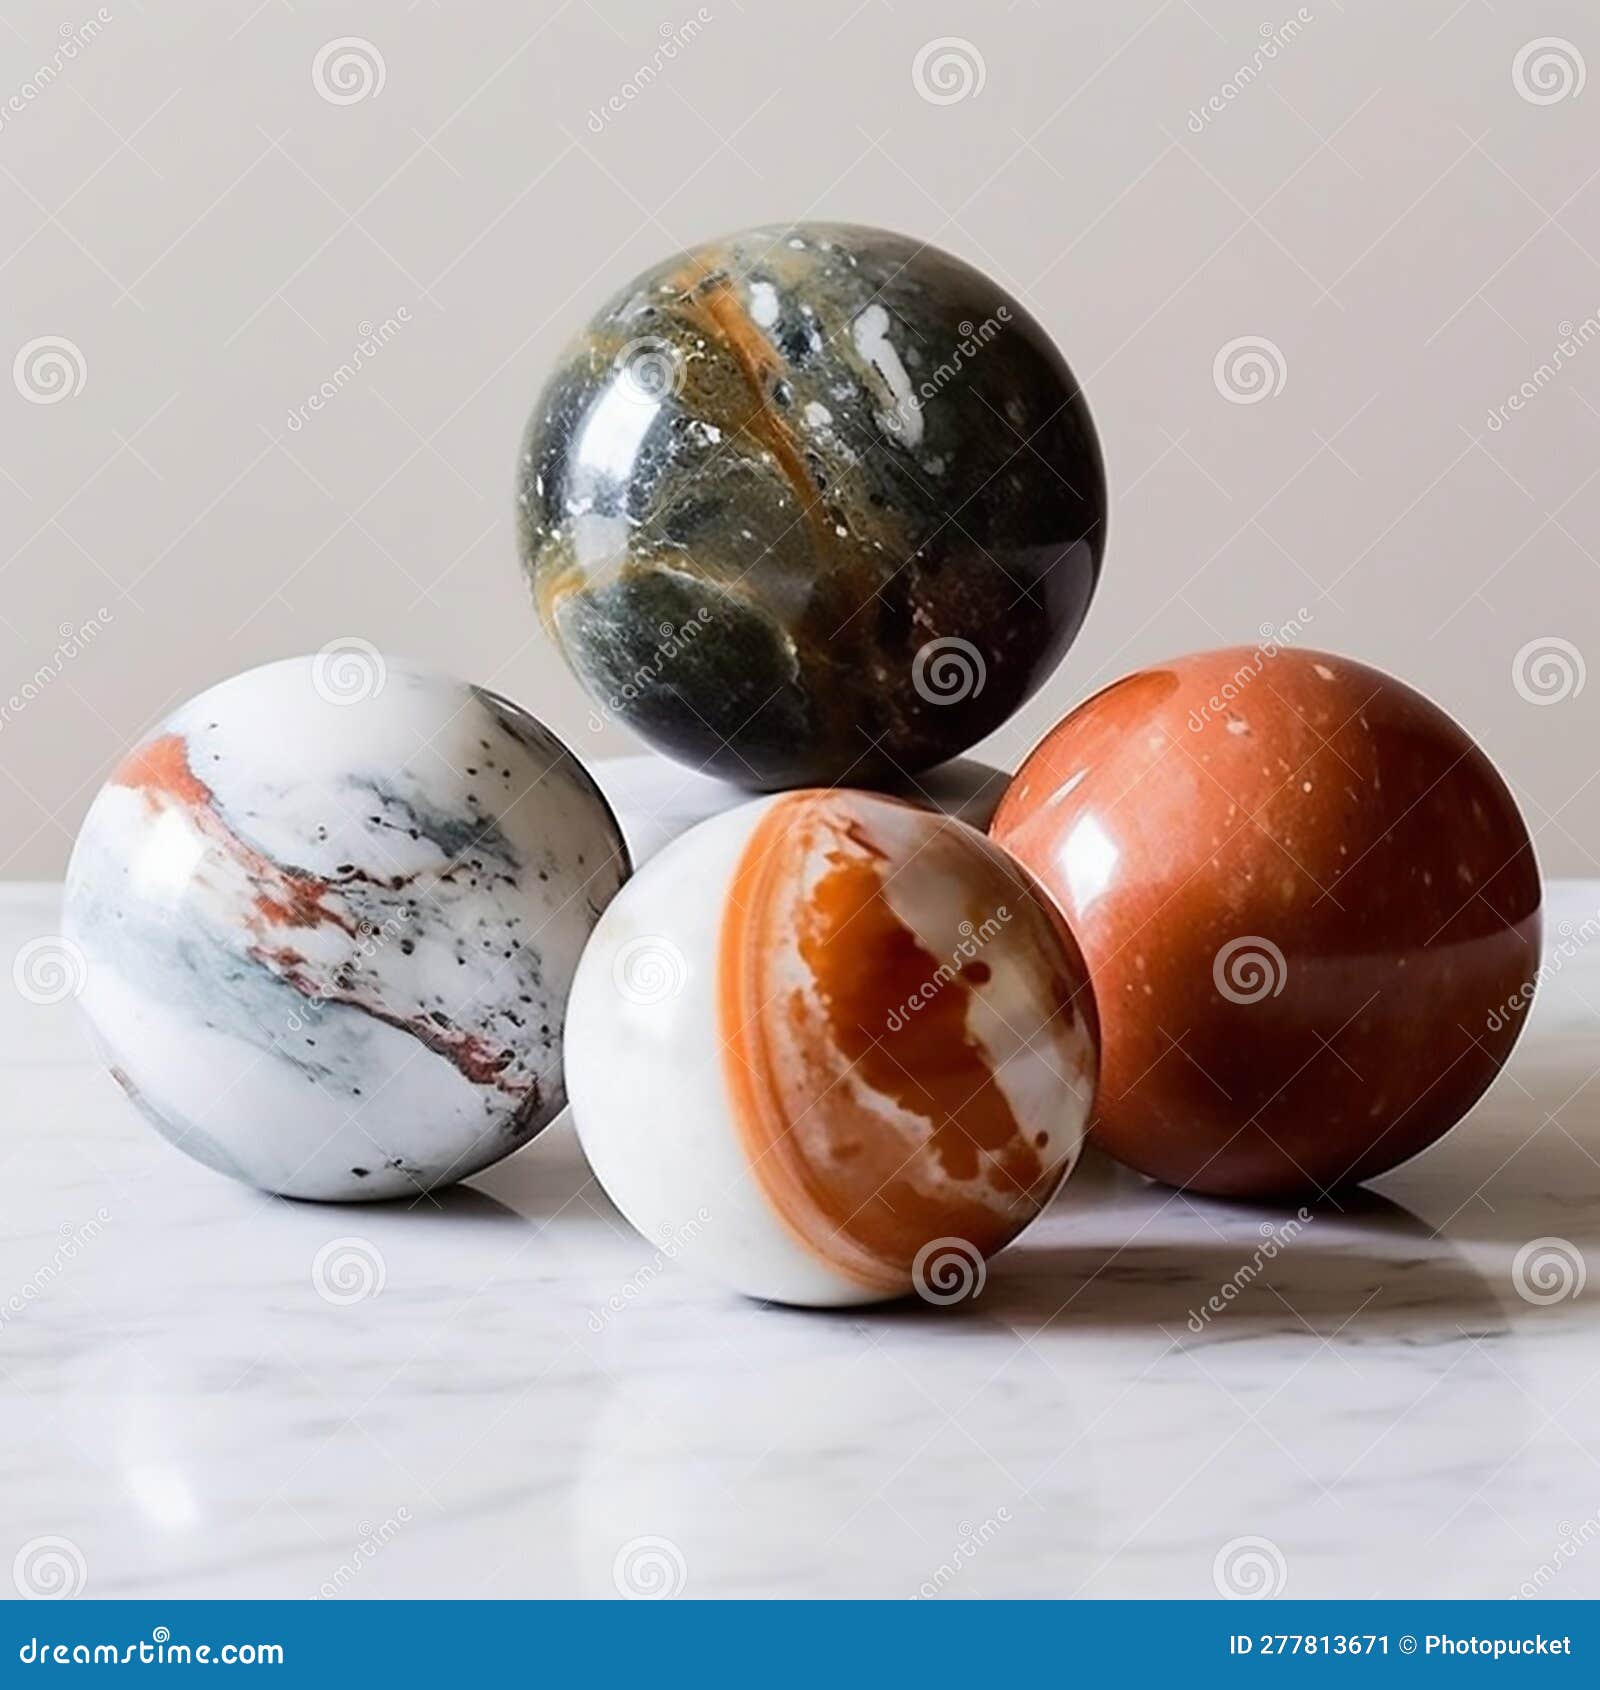 the stone paperweight collection